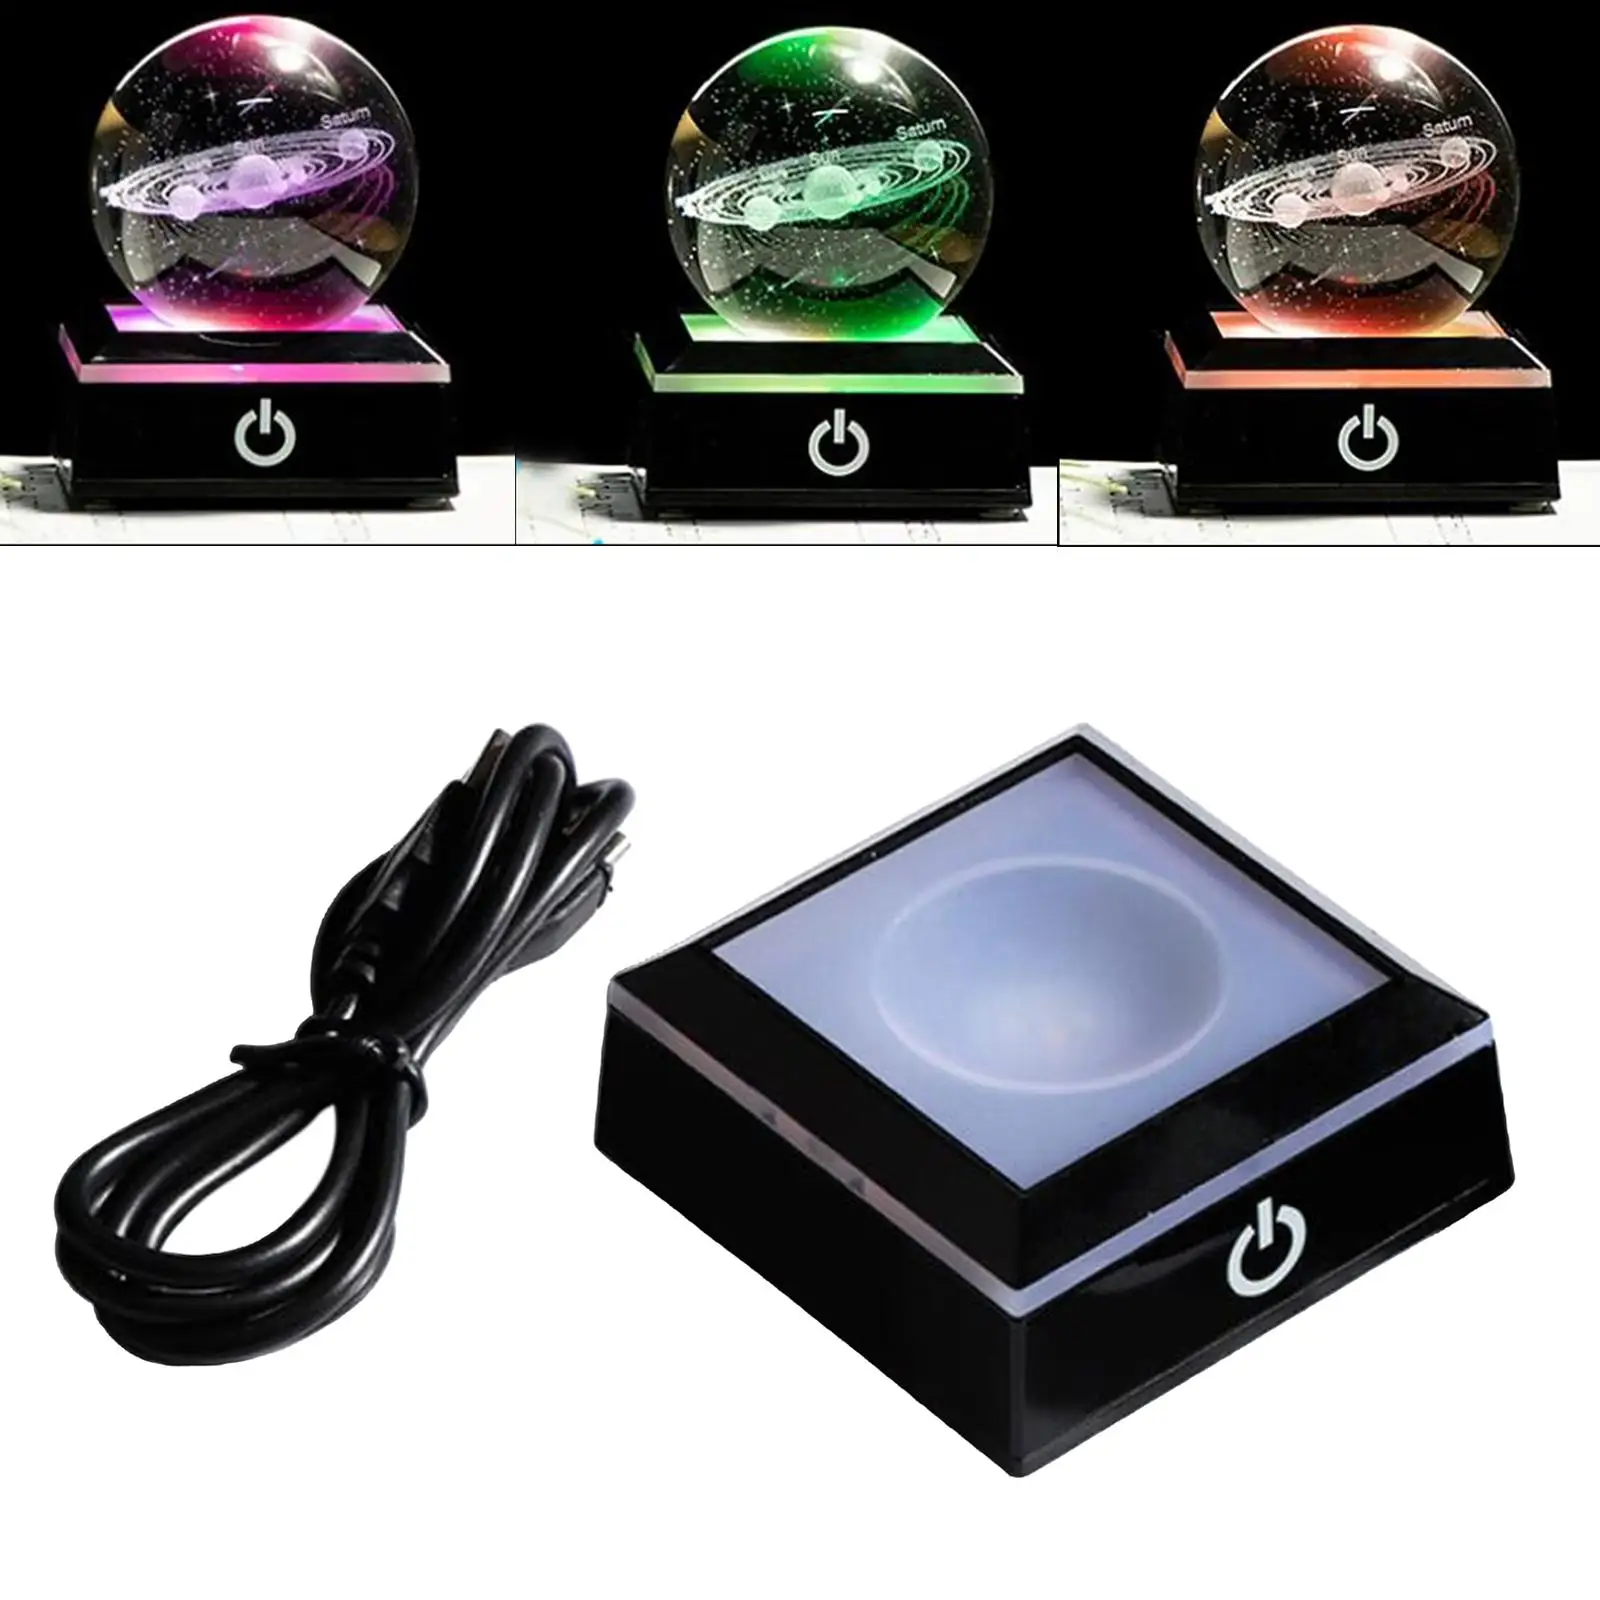 Changing base colored light rotating crystal display stand with 3D crystals